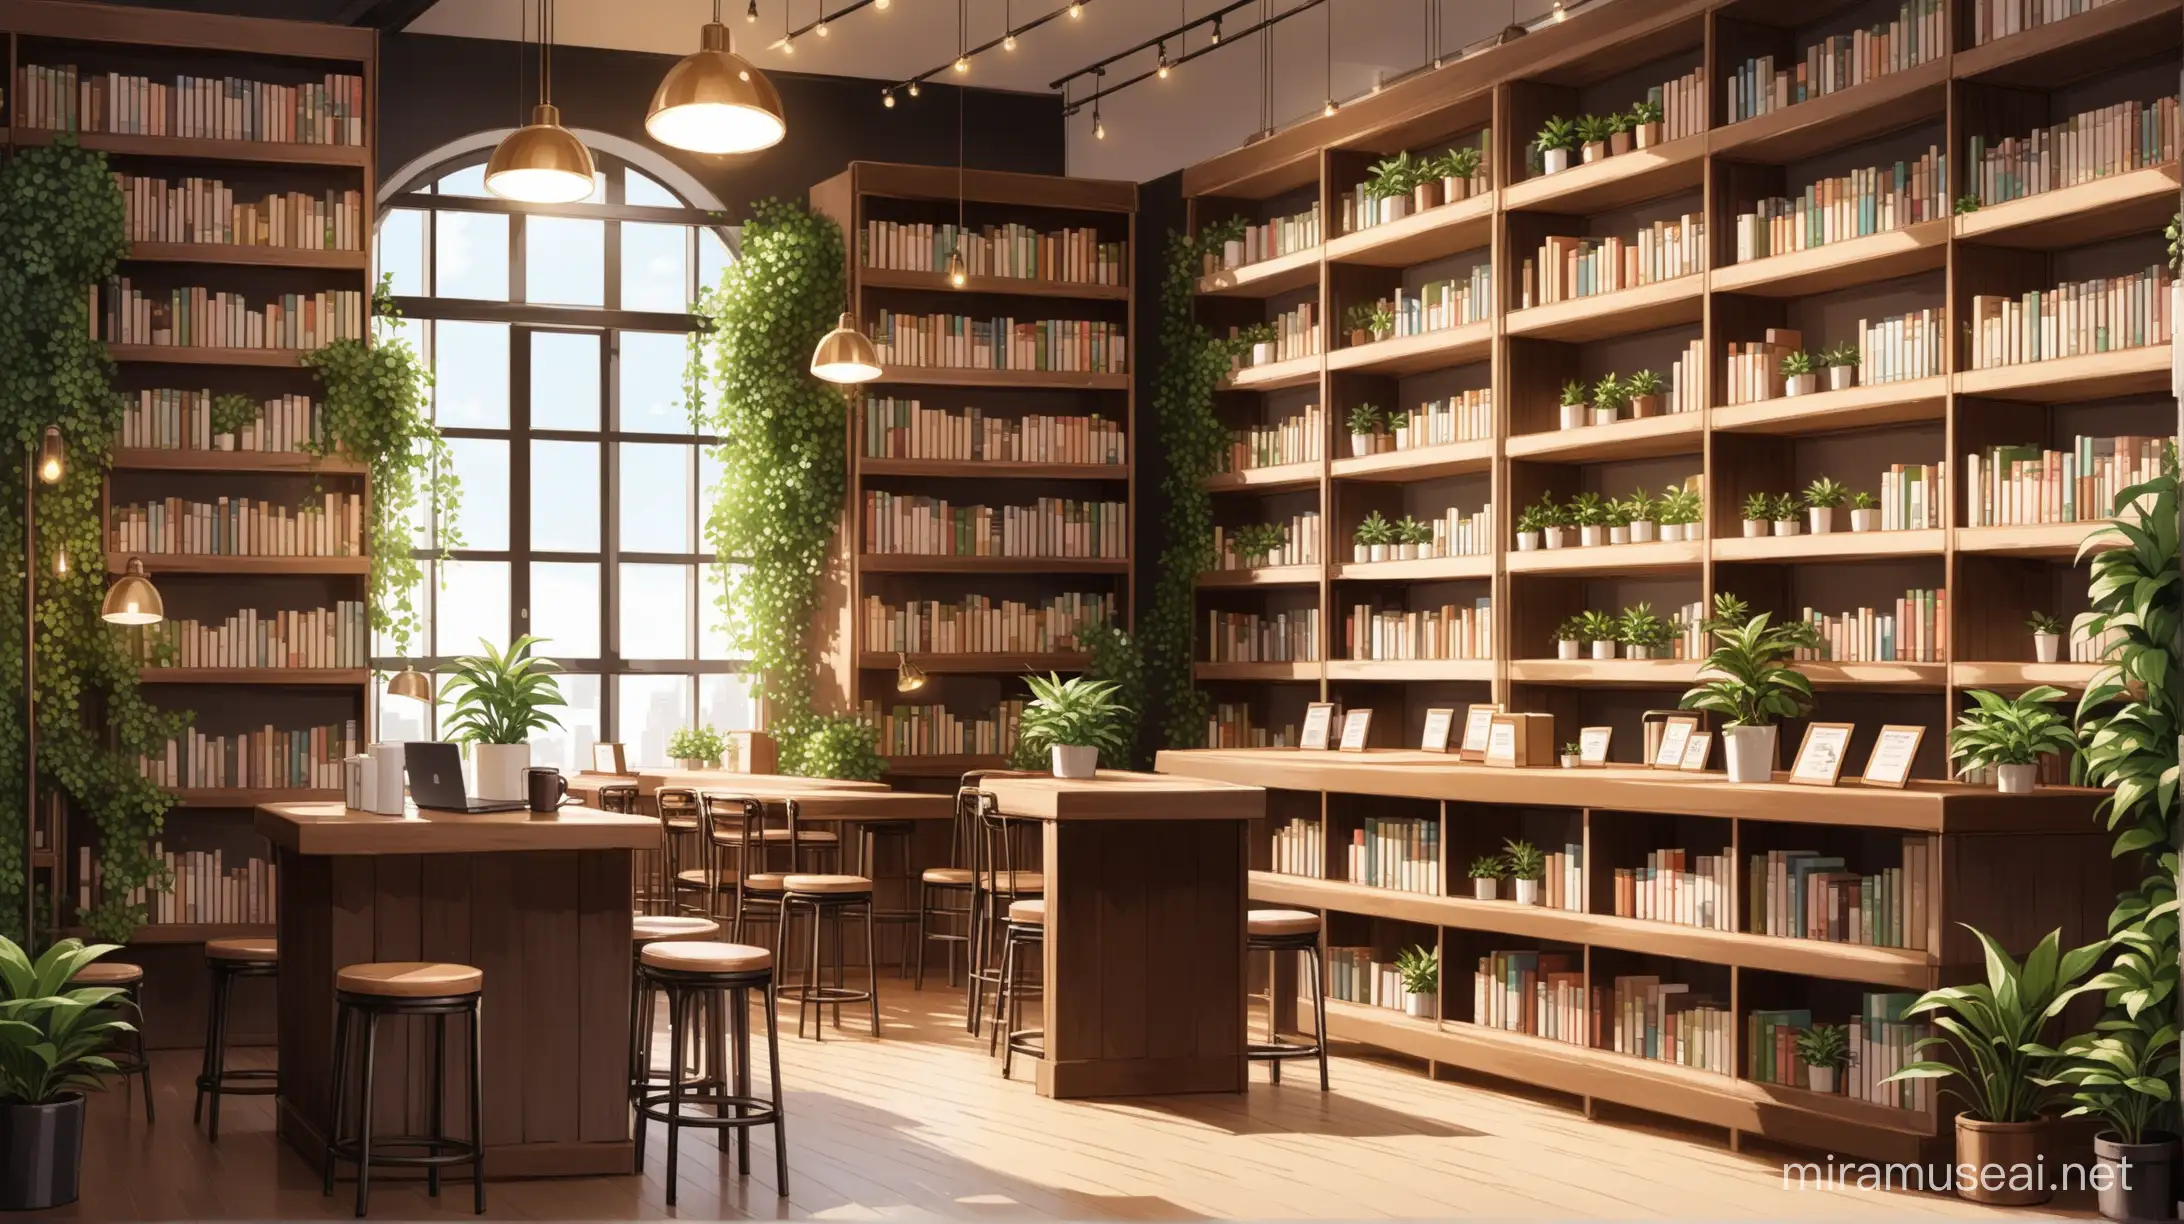 Cozy Coffee Shop Library with Lush Greenery Decor